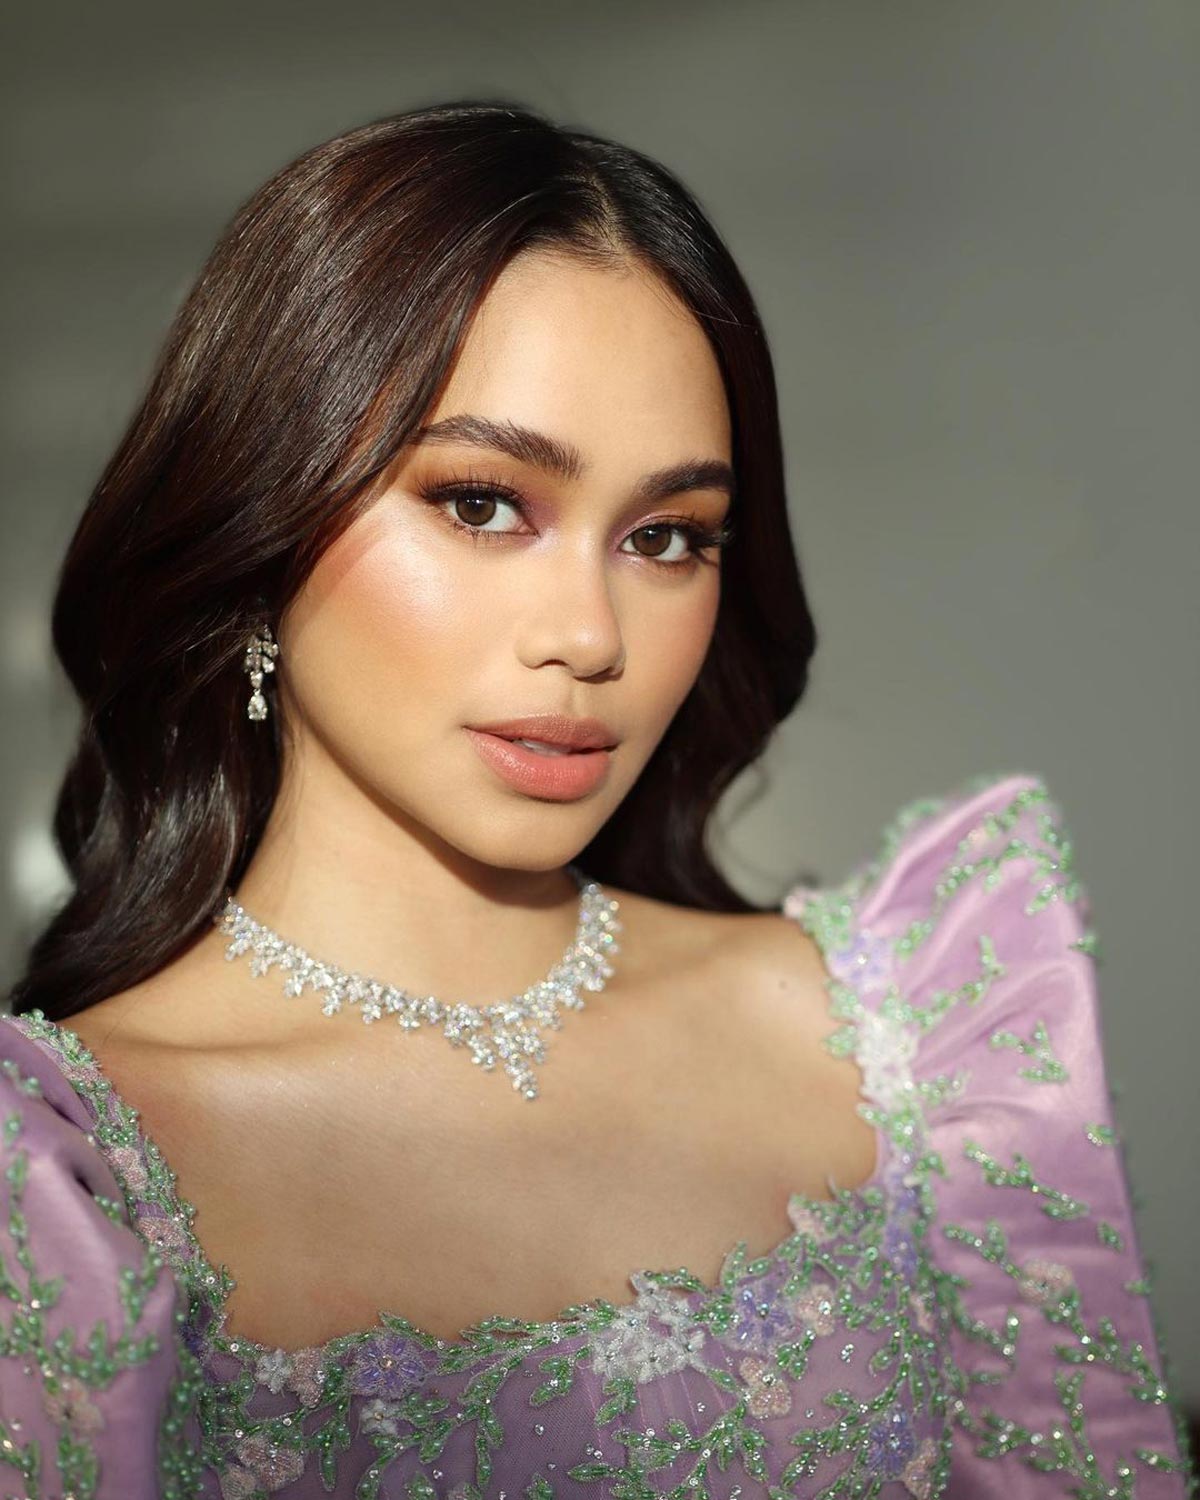 10 Classy Graduation Makeup Looks That Look Stunning in Photos Preview.ph